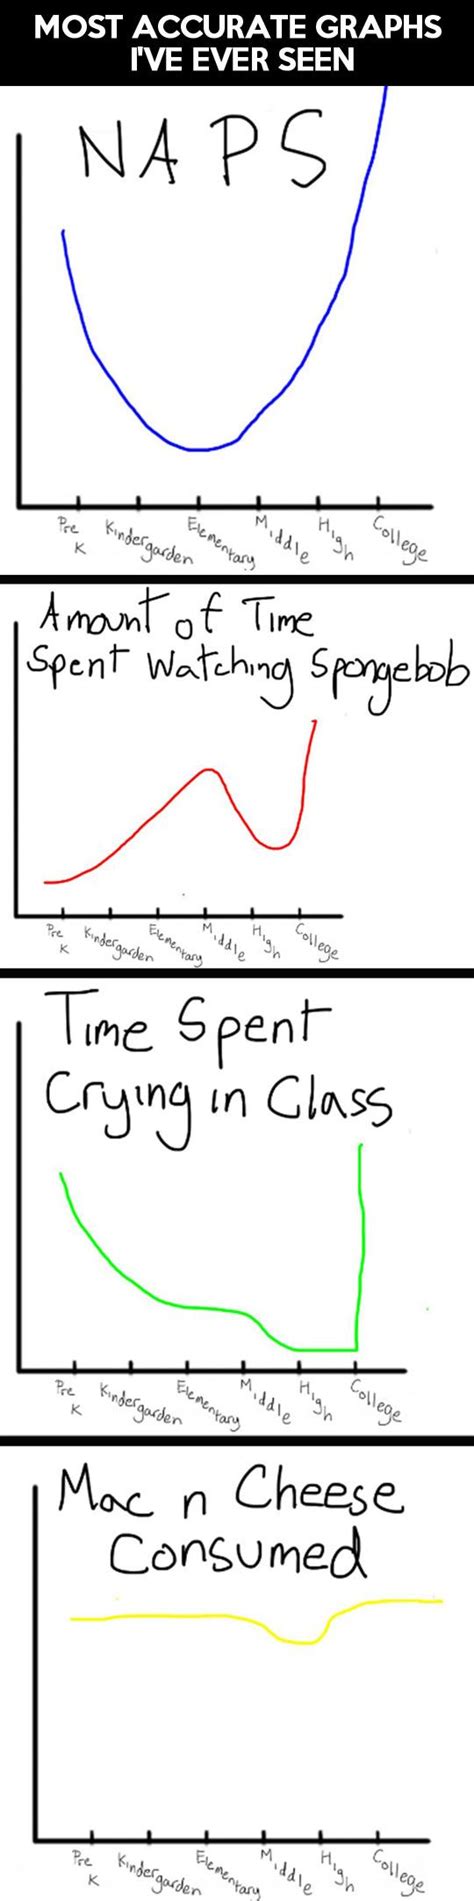 Most Accurate Graphs Ever Made Funny Pins Funny Memes Funny Stuff